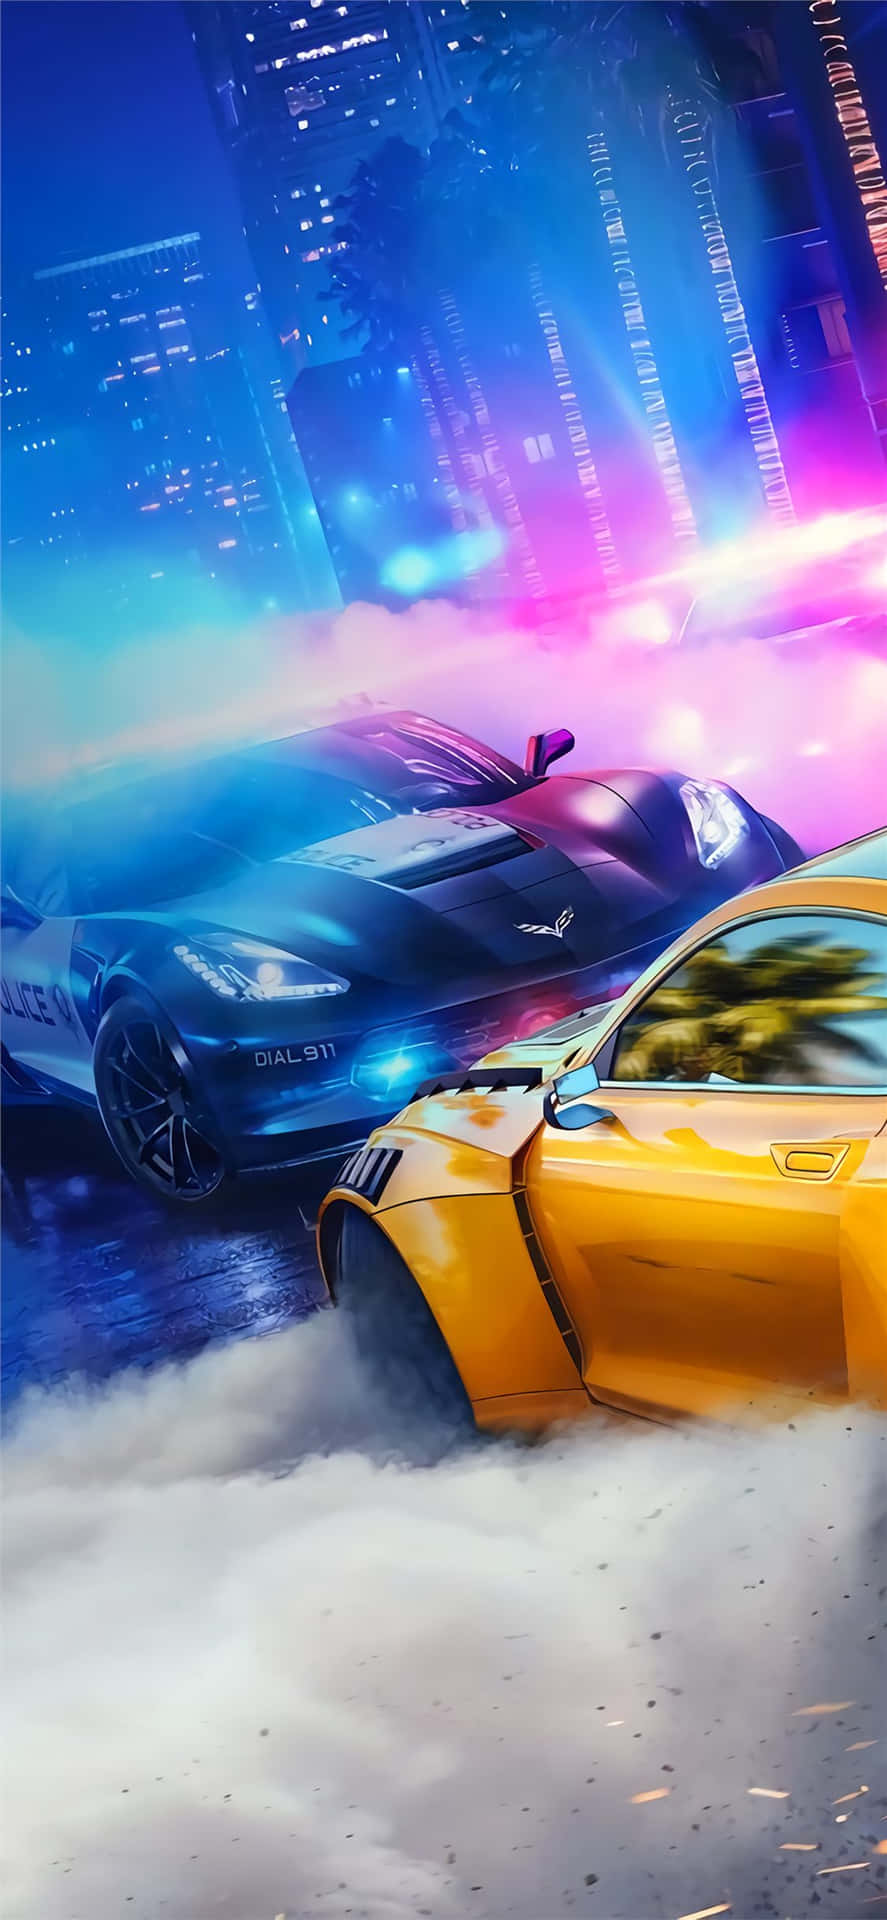 Fondods De Need For Speed Payback Para Iphone Xs